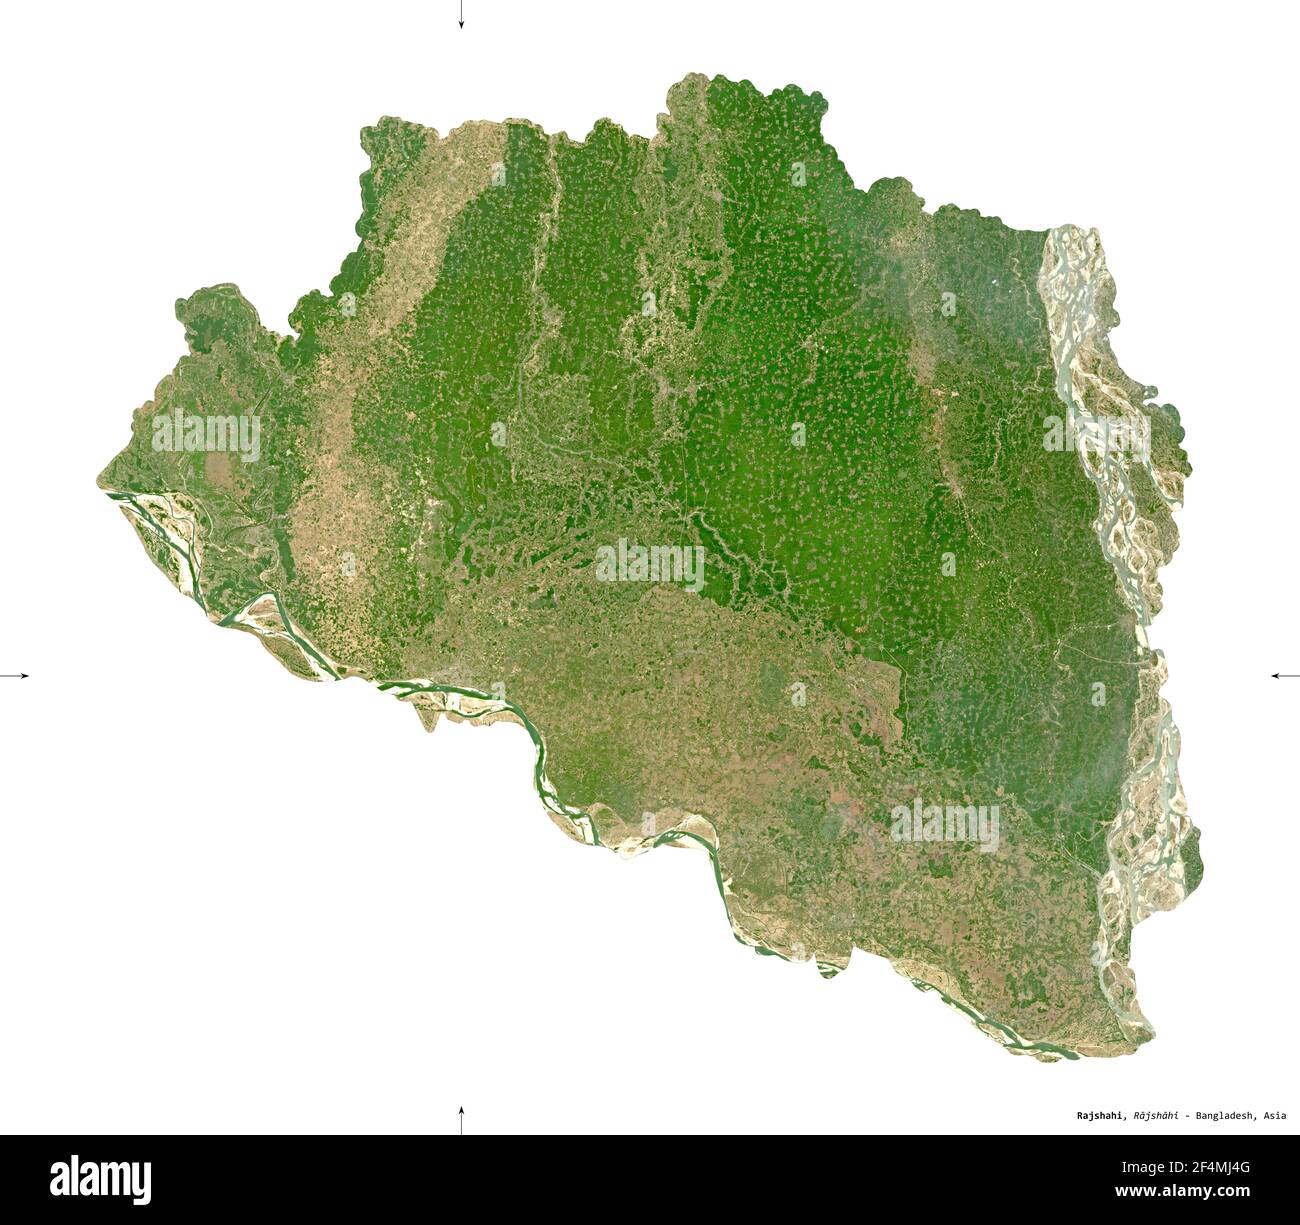 Rajshahi, division of Bangladesh. Sentinel-2 satellite imagery. Shape isolated on white solid. Description, location of the capital. Contains modified Stock Photo